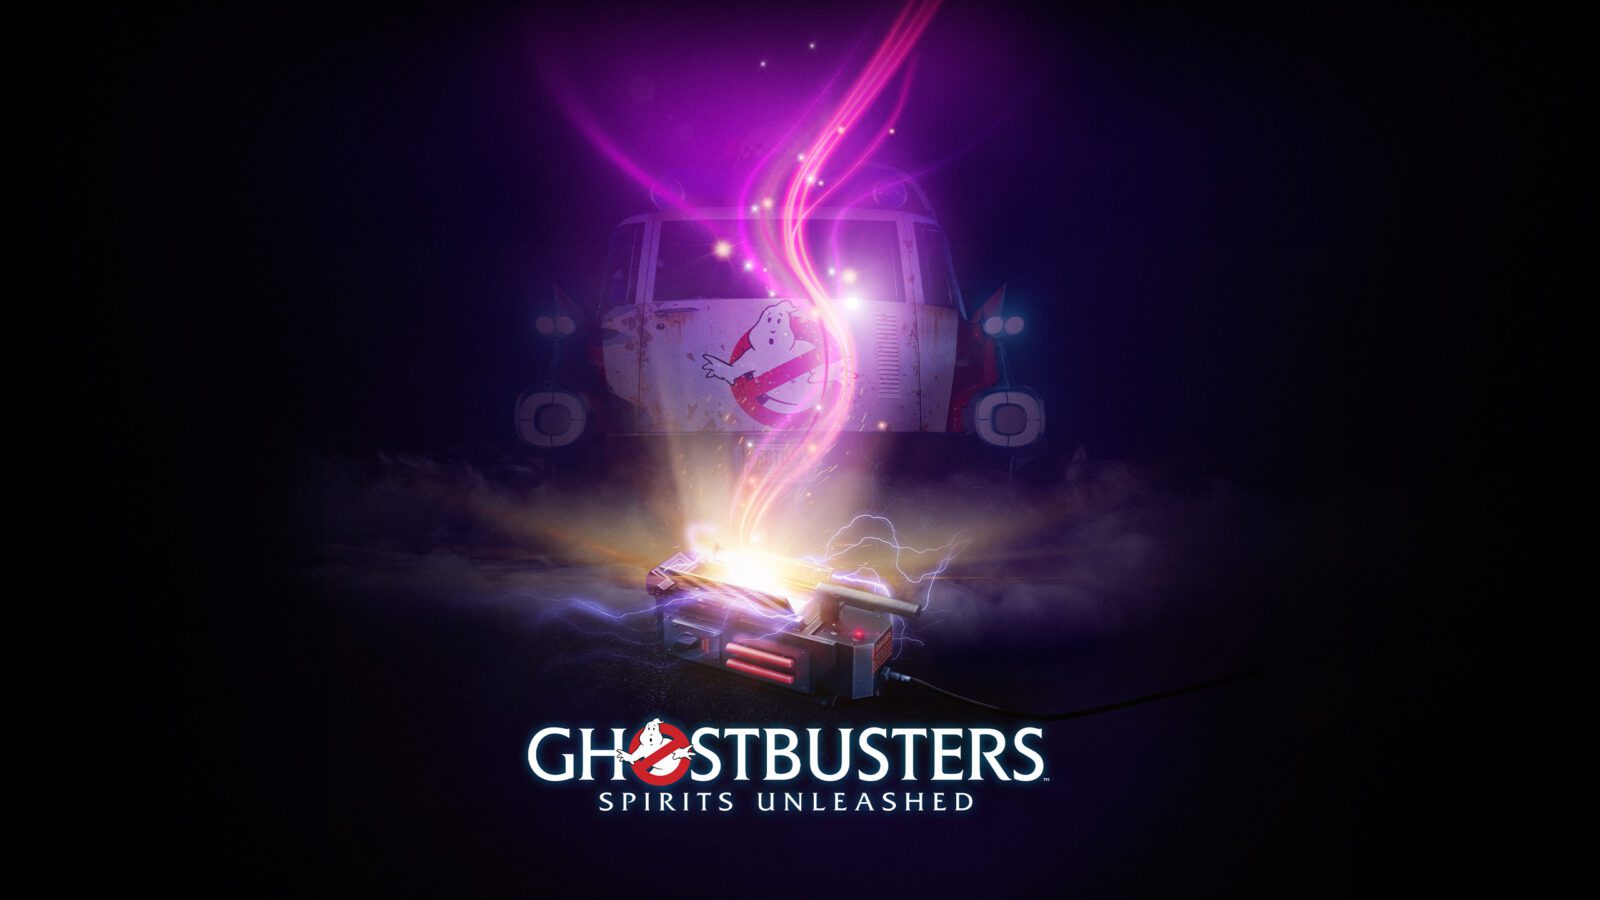 Ghosbusters: Spirits Unleashed imagem oficial